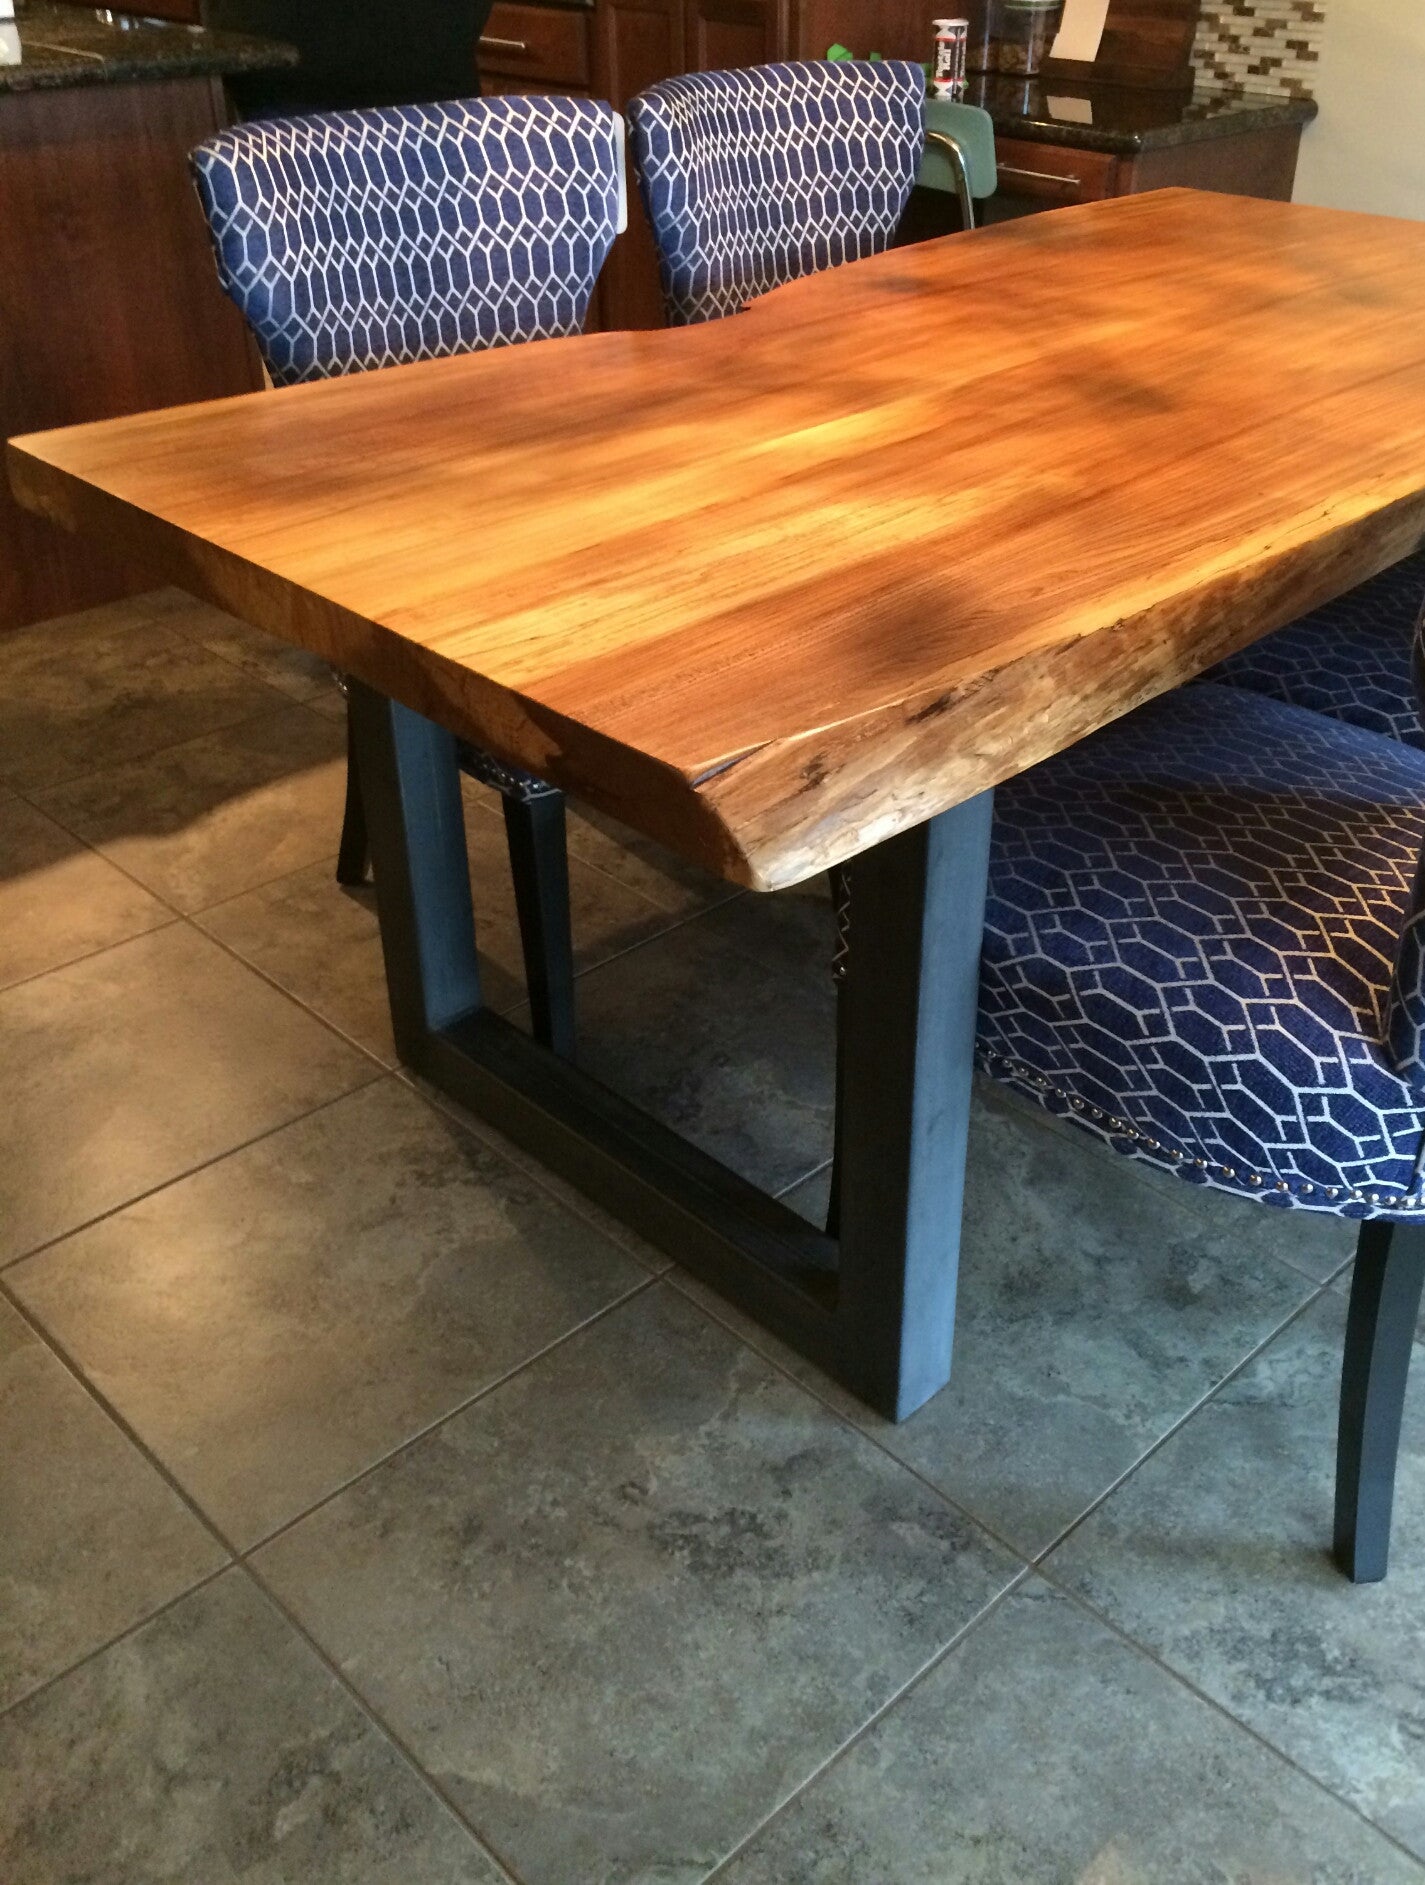 steel and wood table